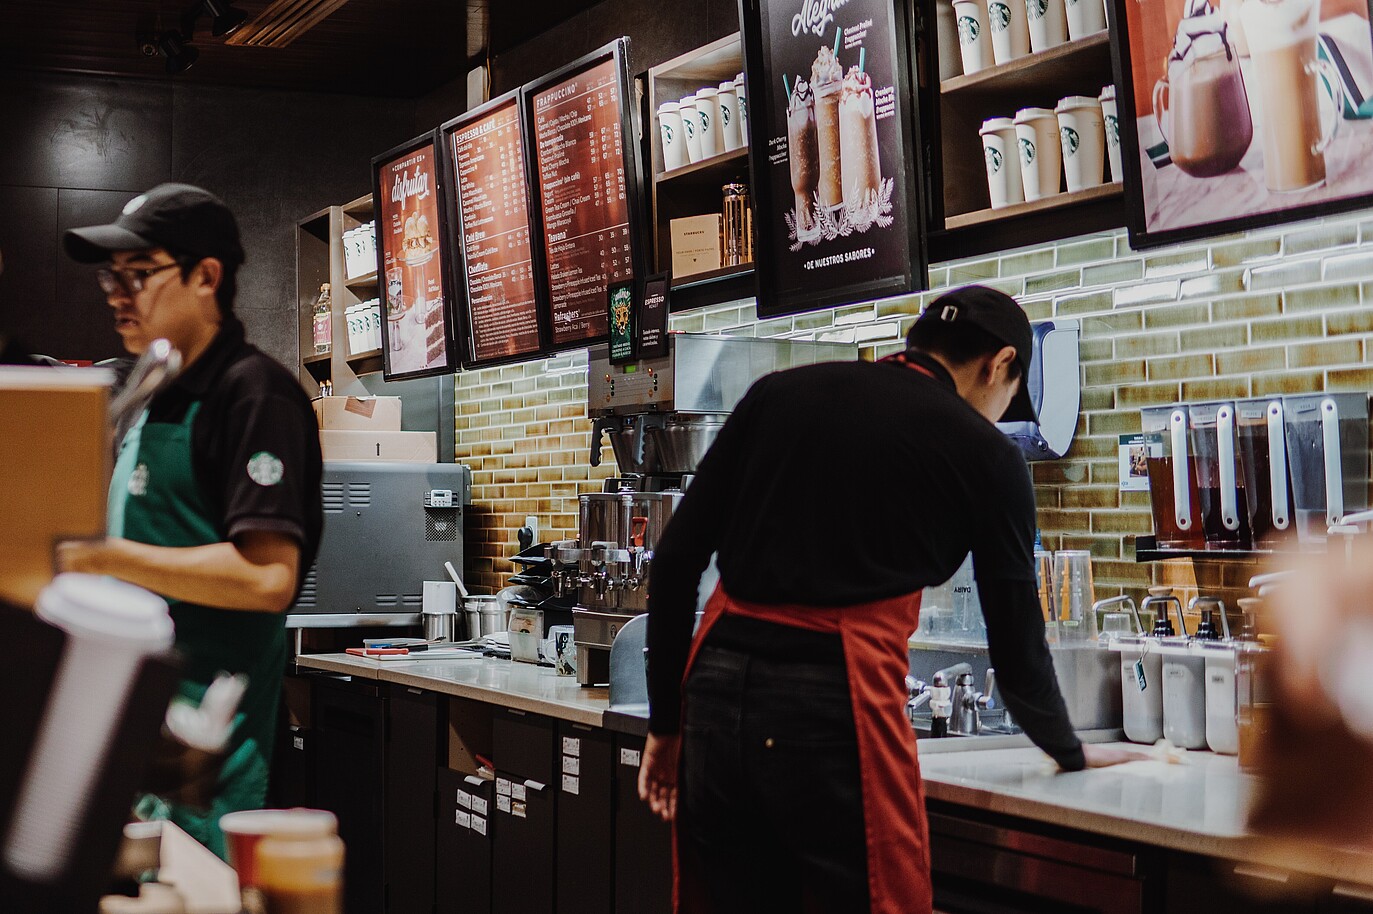 Starbucks employees actively working behind the counter, preparing orders and assisting customers.